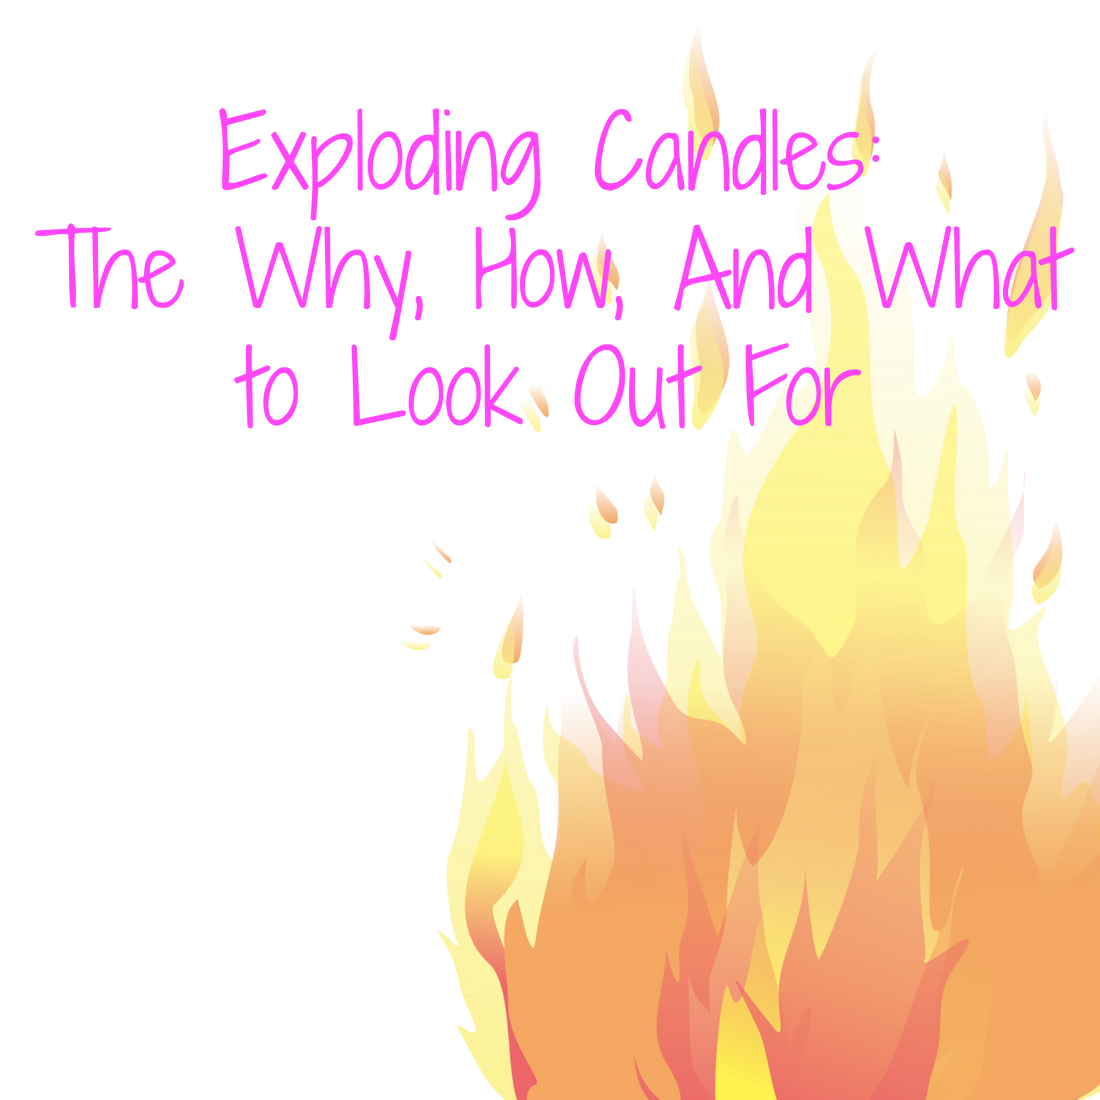 Exploding Candles: The Why, How, And What to Look Out For